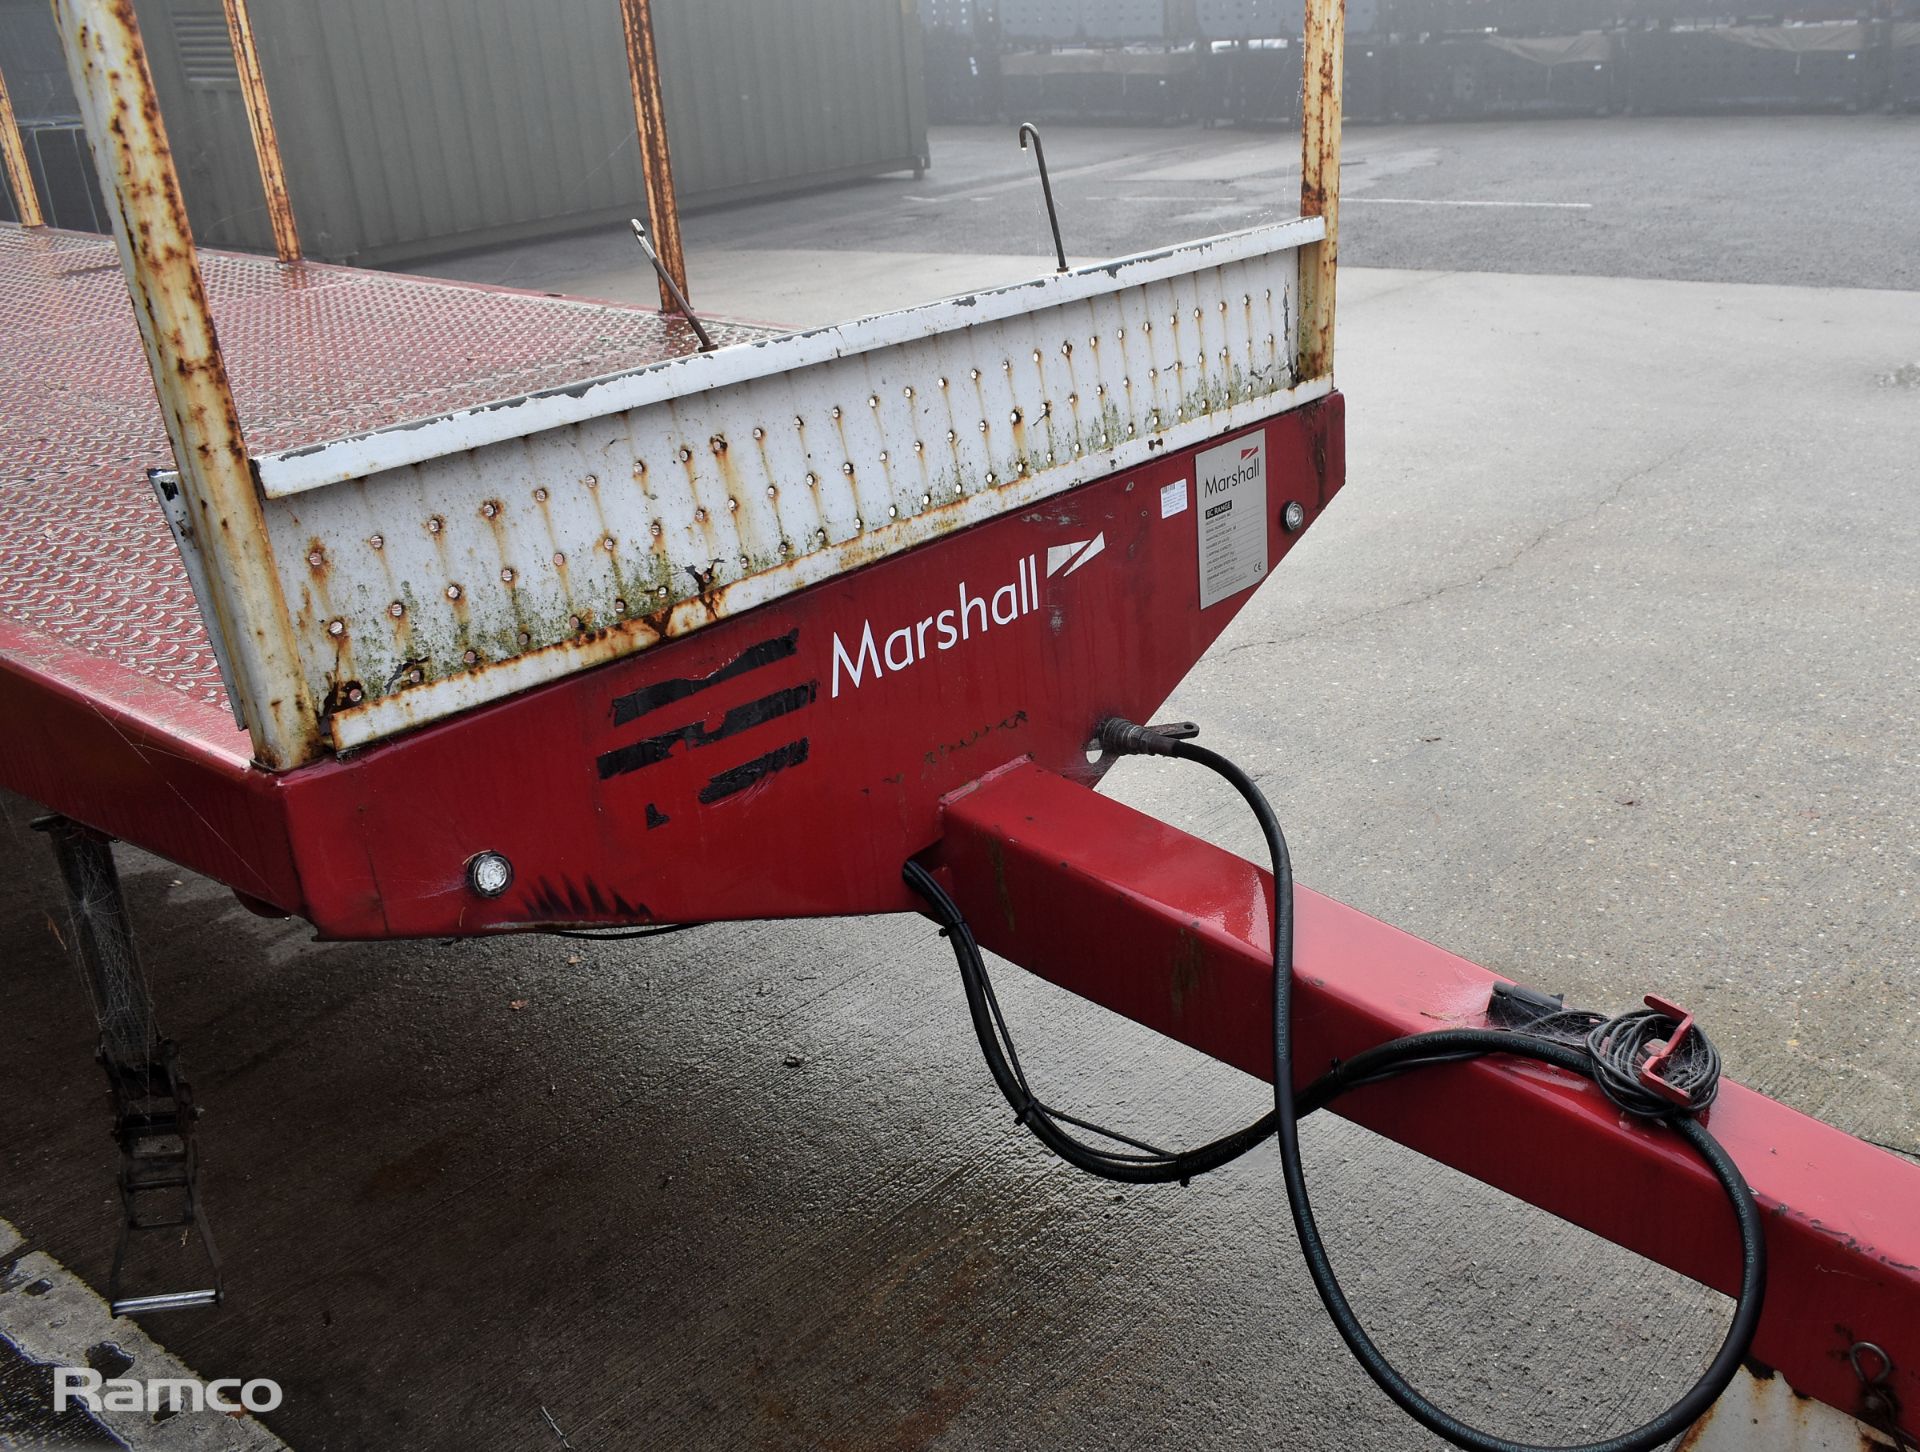 Marshall BC18N 2019 single axle flatbed trailer - 5000kg carrying capacity - serial number 107531 - Image 9 of 12